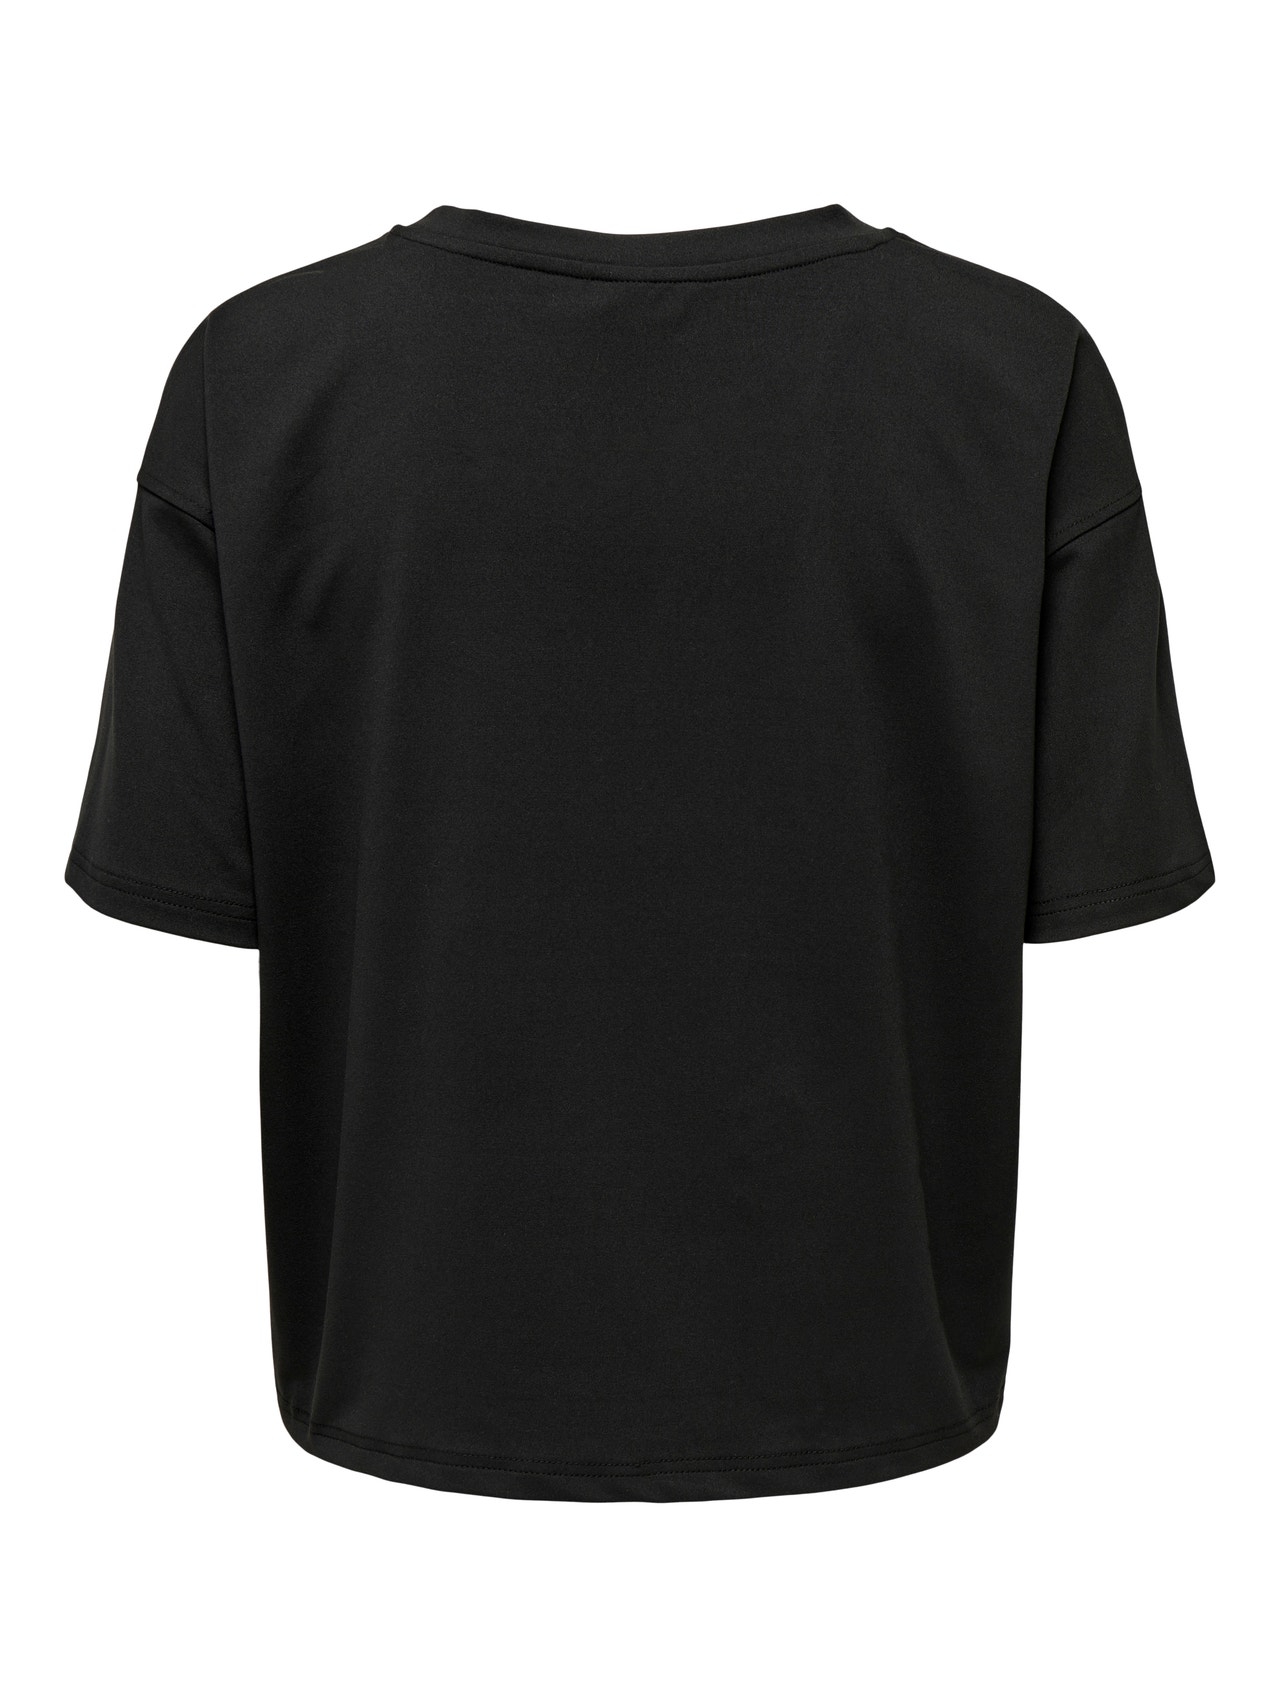 ONLY Cropped training t-shirt -Black - 15304595